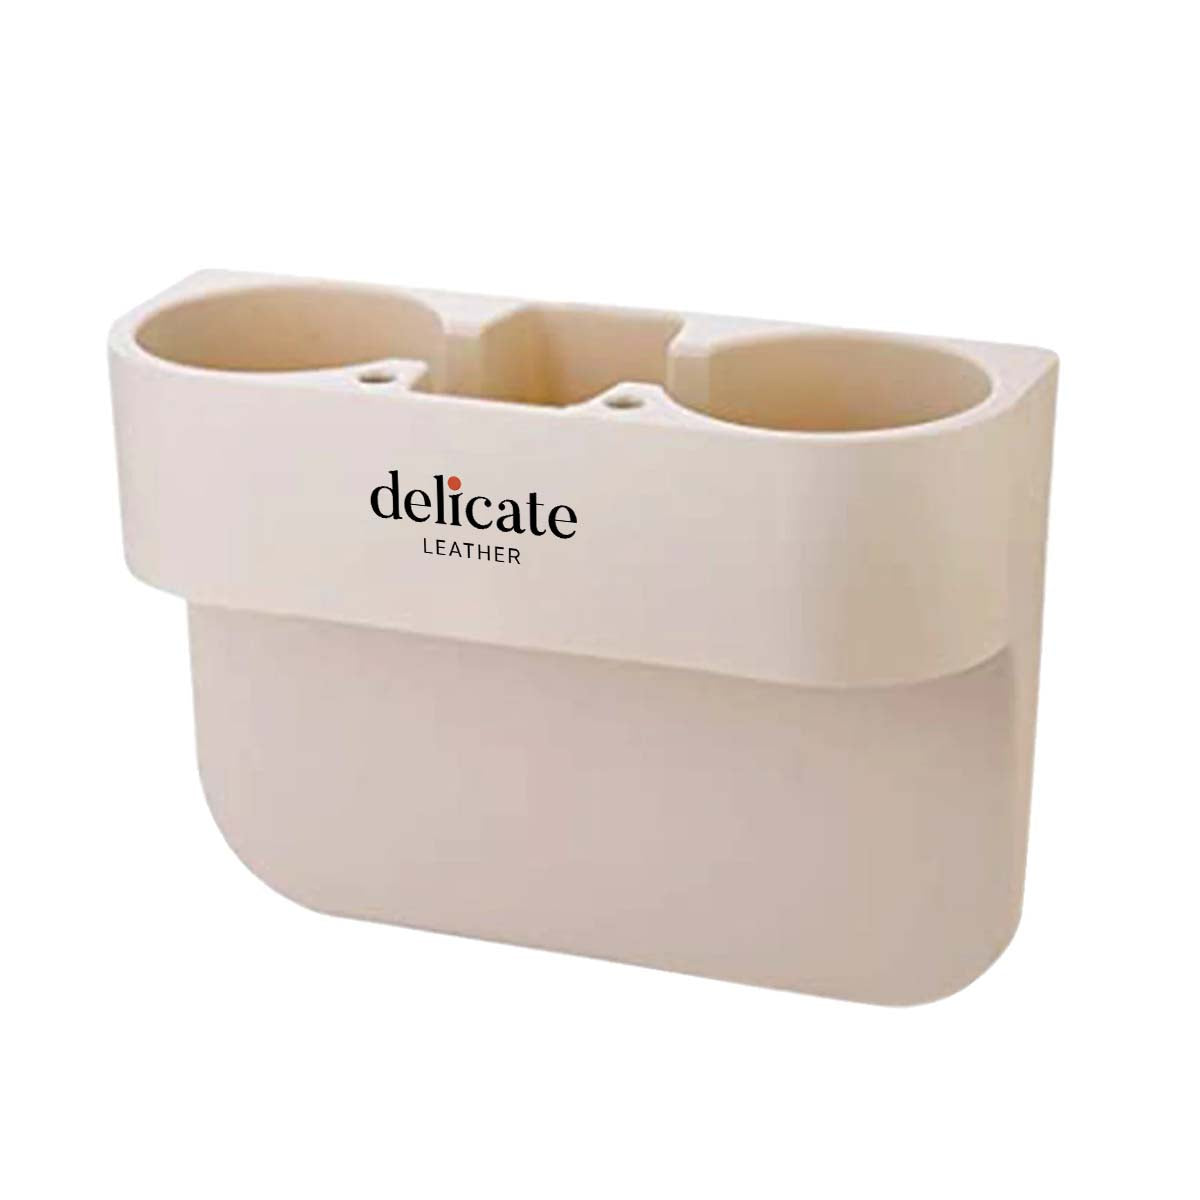 Delicate Leather Car Cup Holder: Convenient and Secure Beverage Storage for Your Vehicle